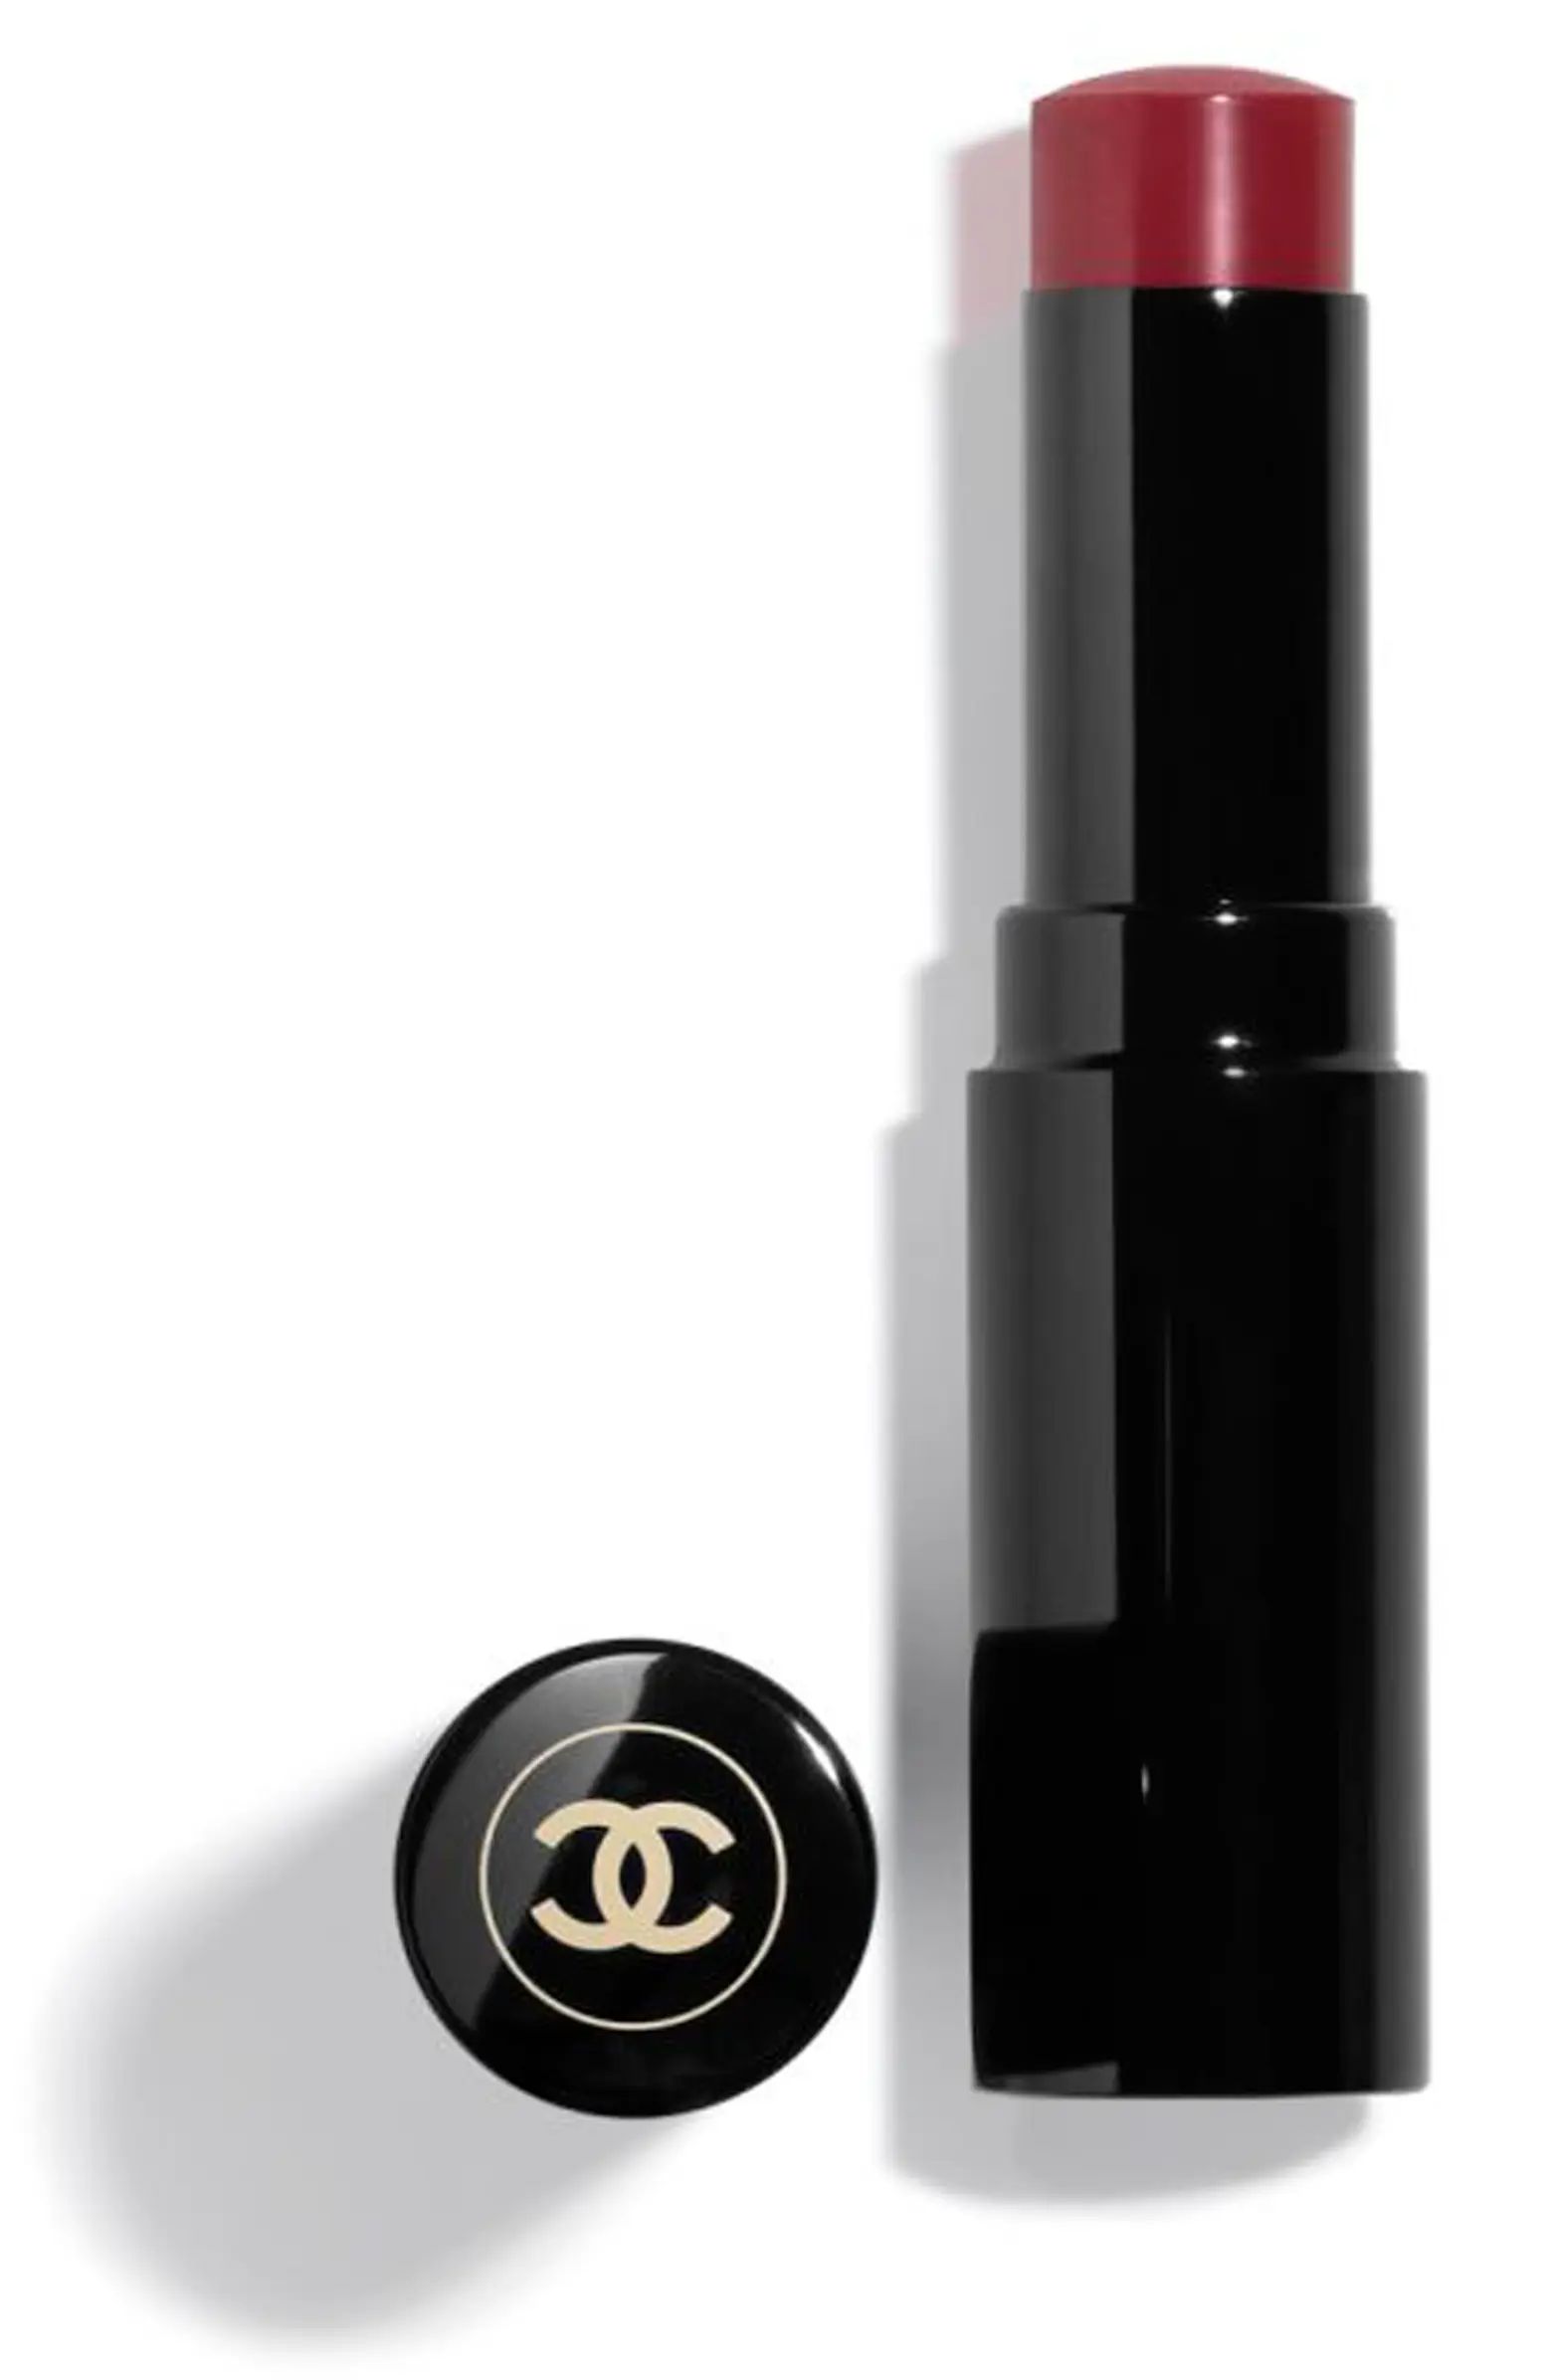 CHANEL LES BEIGES HEALTHY GLOW Lip Balm | Nordstrom | Nordstrom